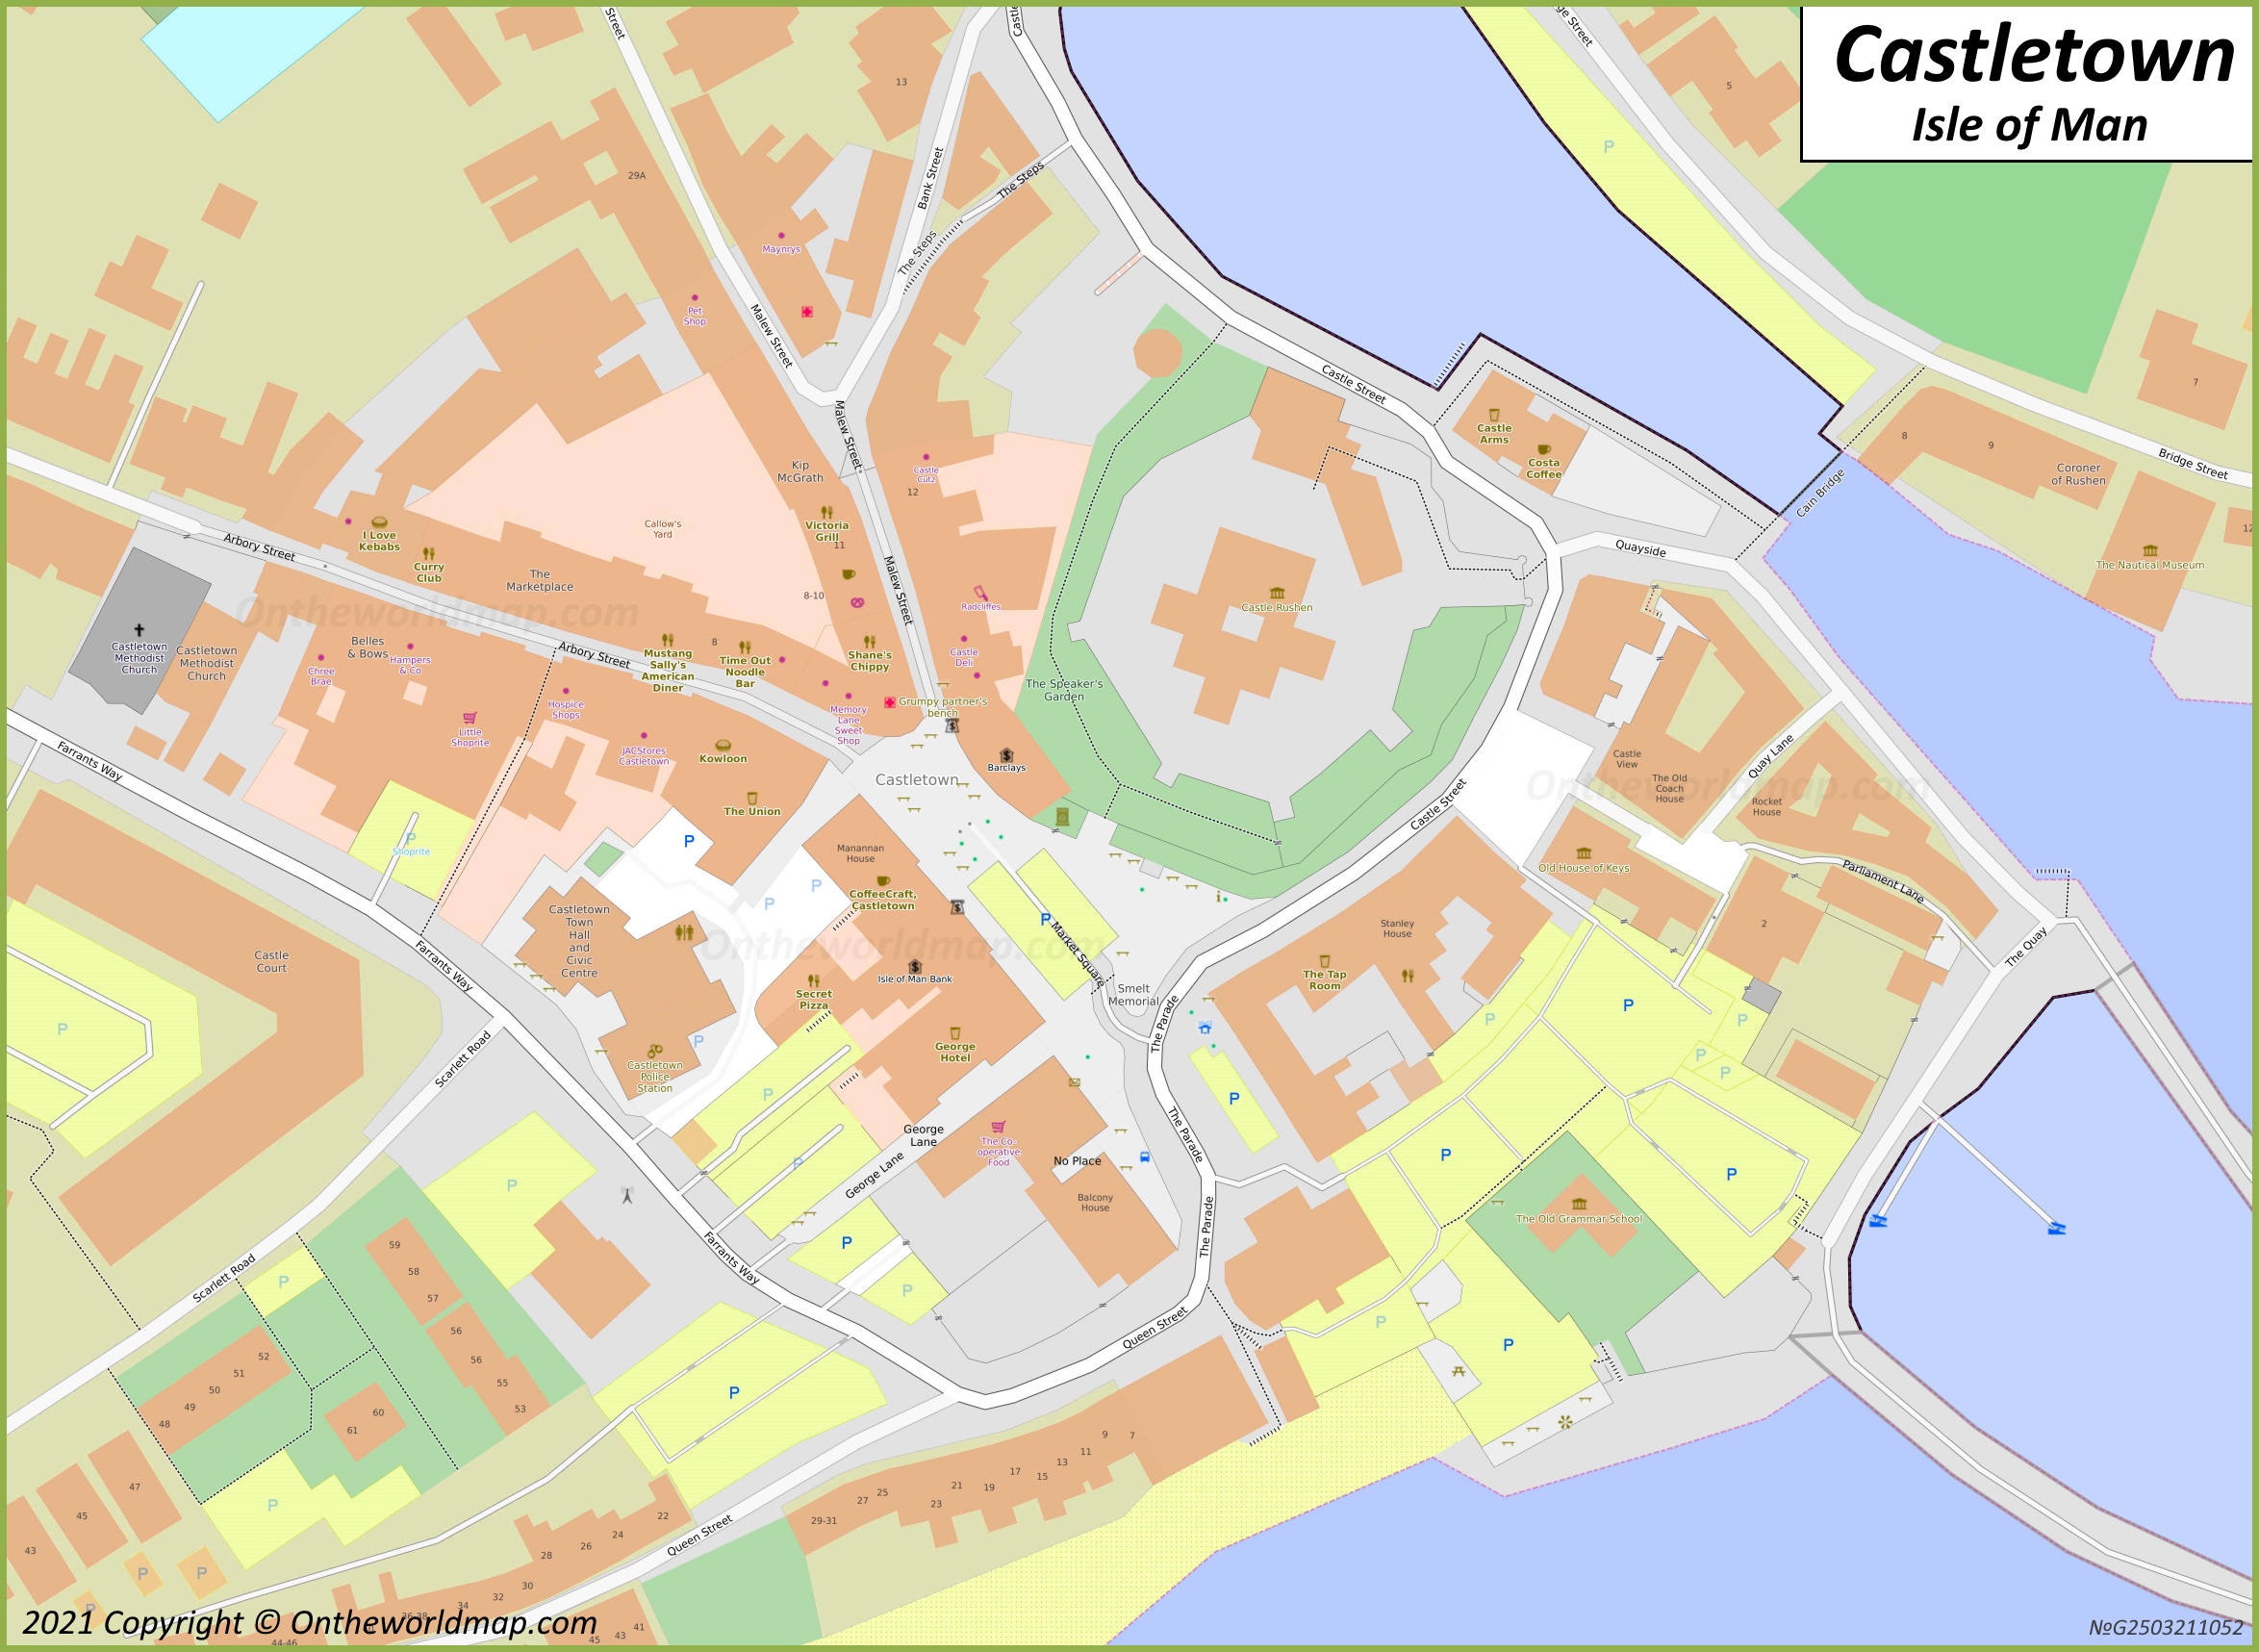 Castletown Old Town Map